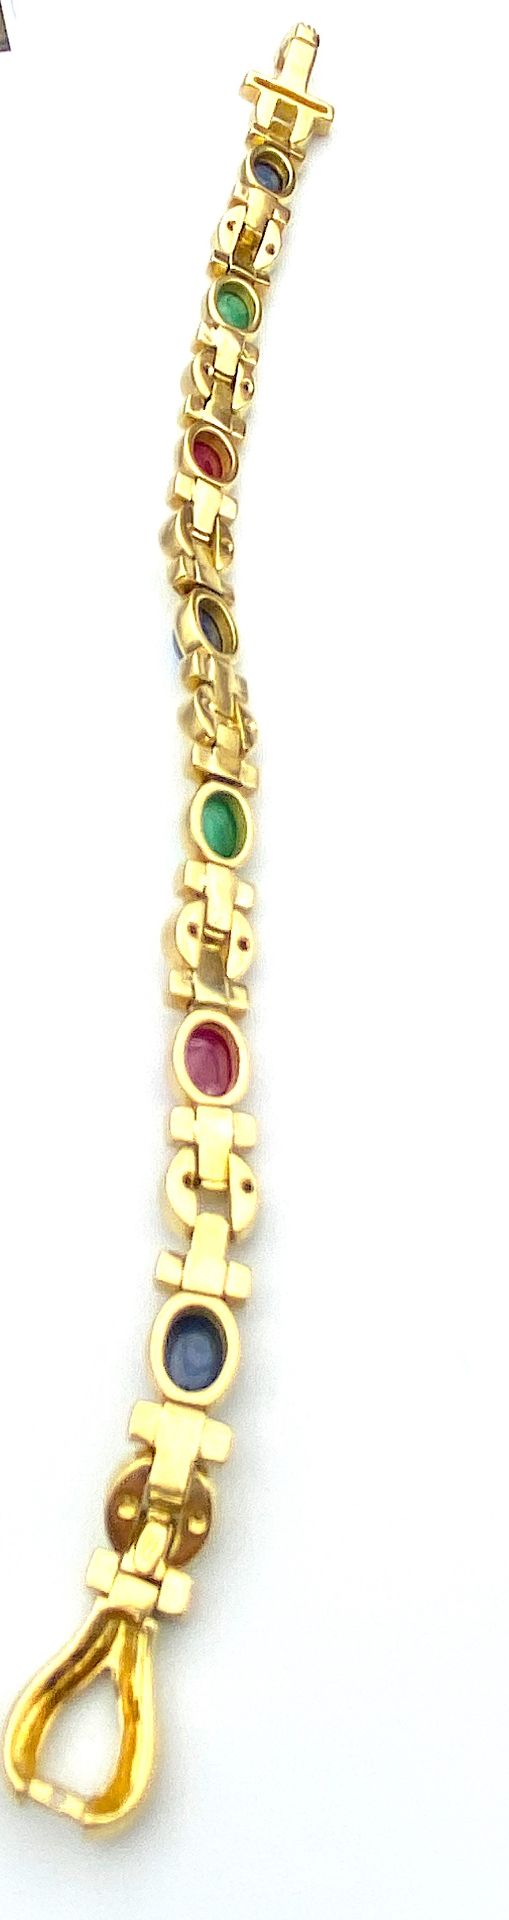 Bracelet with rubies, sapphires, emeralds and diamonds - Image 5 of 6